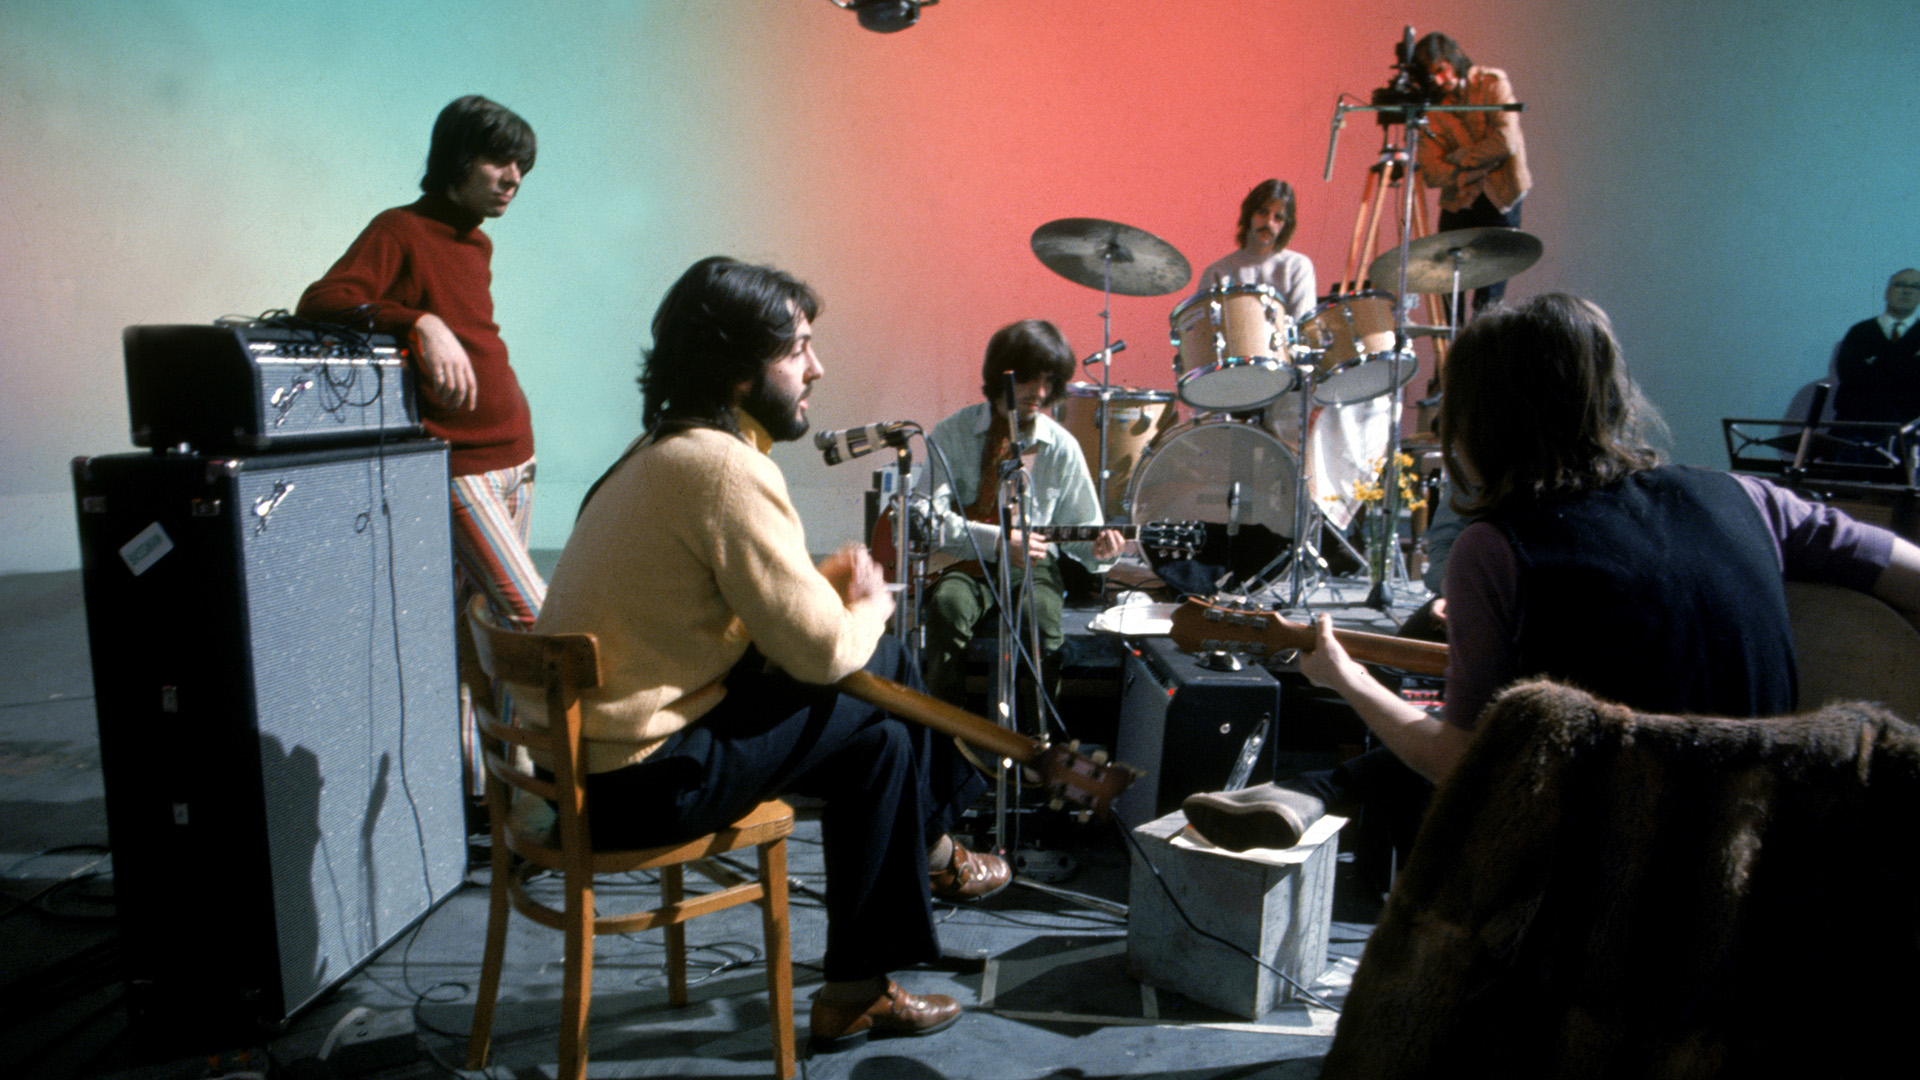 The Beatles during the filming of Let It Be in Twickenham Film Studios, 7th January 1969.